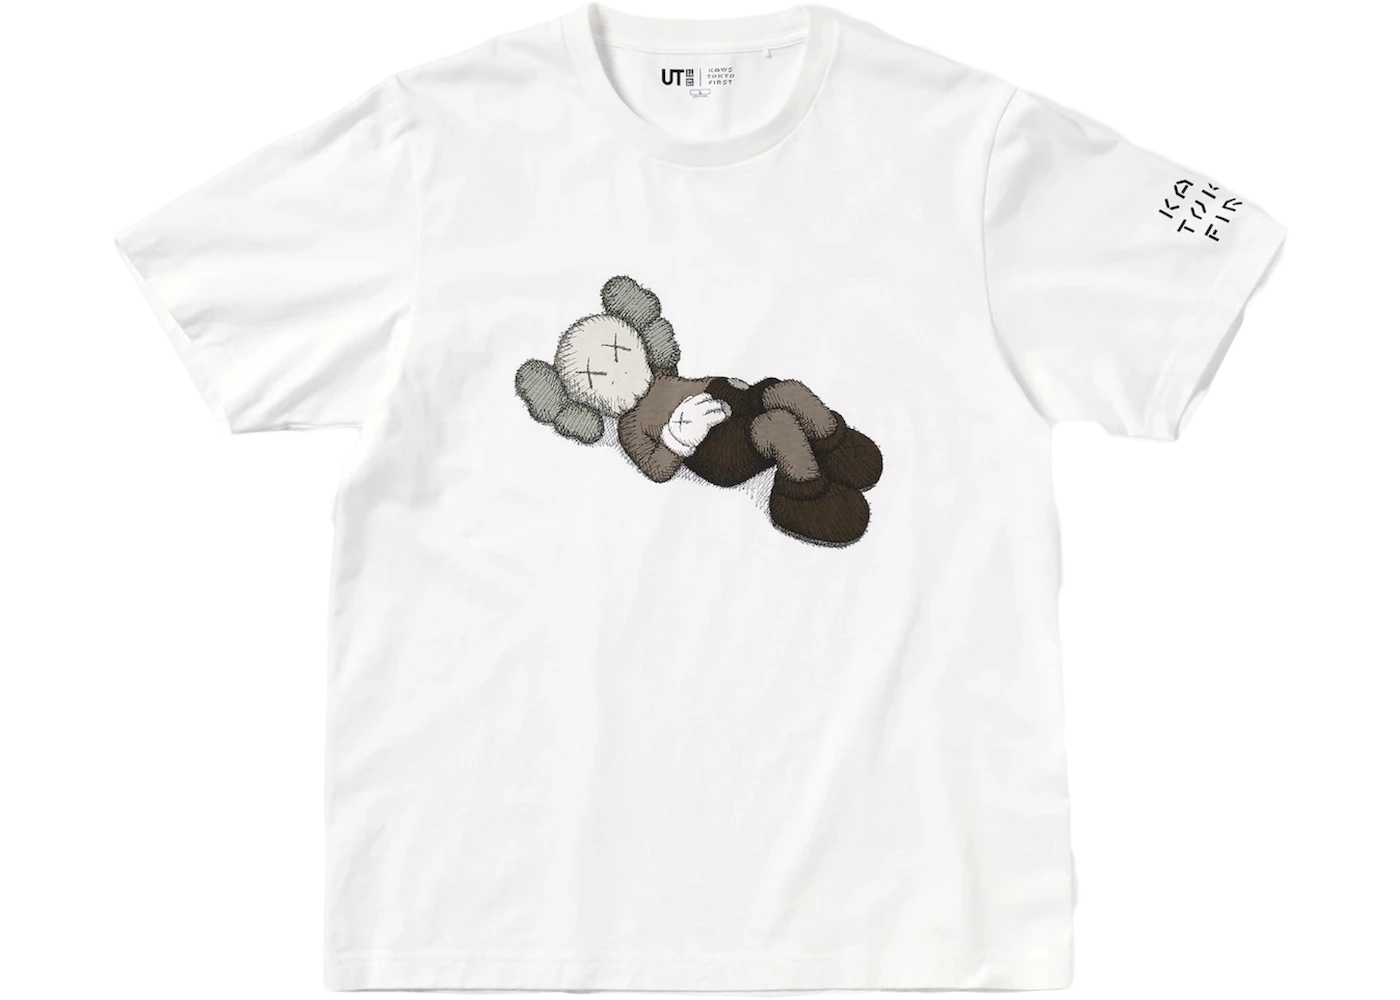 KAWS x Uniqlo Tokyo First Tee (Japanese Sizing) White - SS21